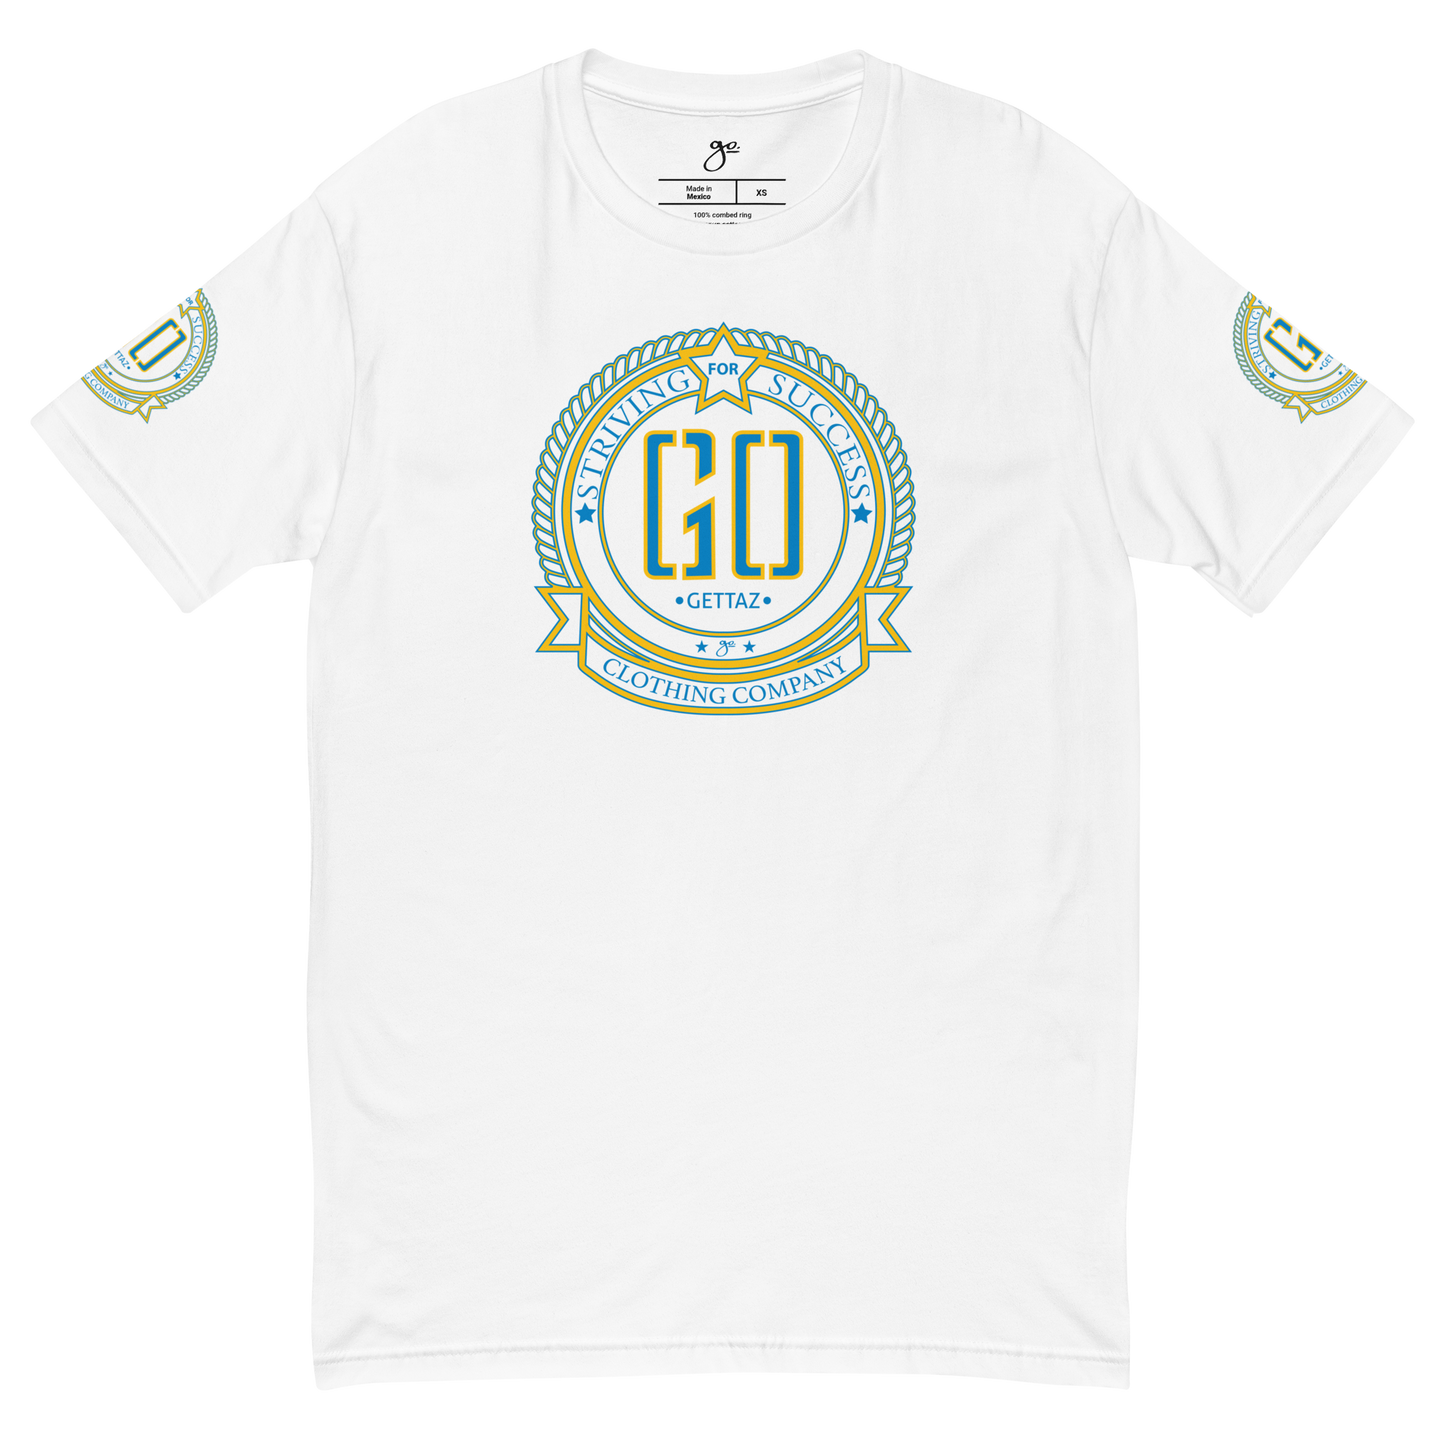 Go. Success T-Shirt - Charger Edition